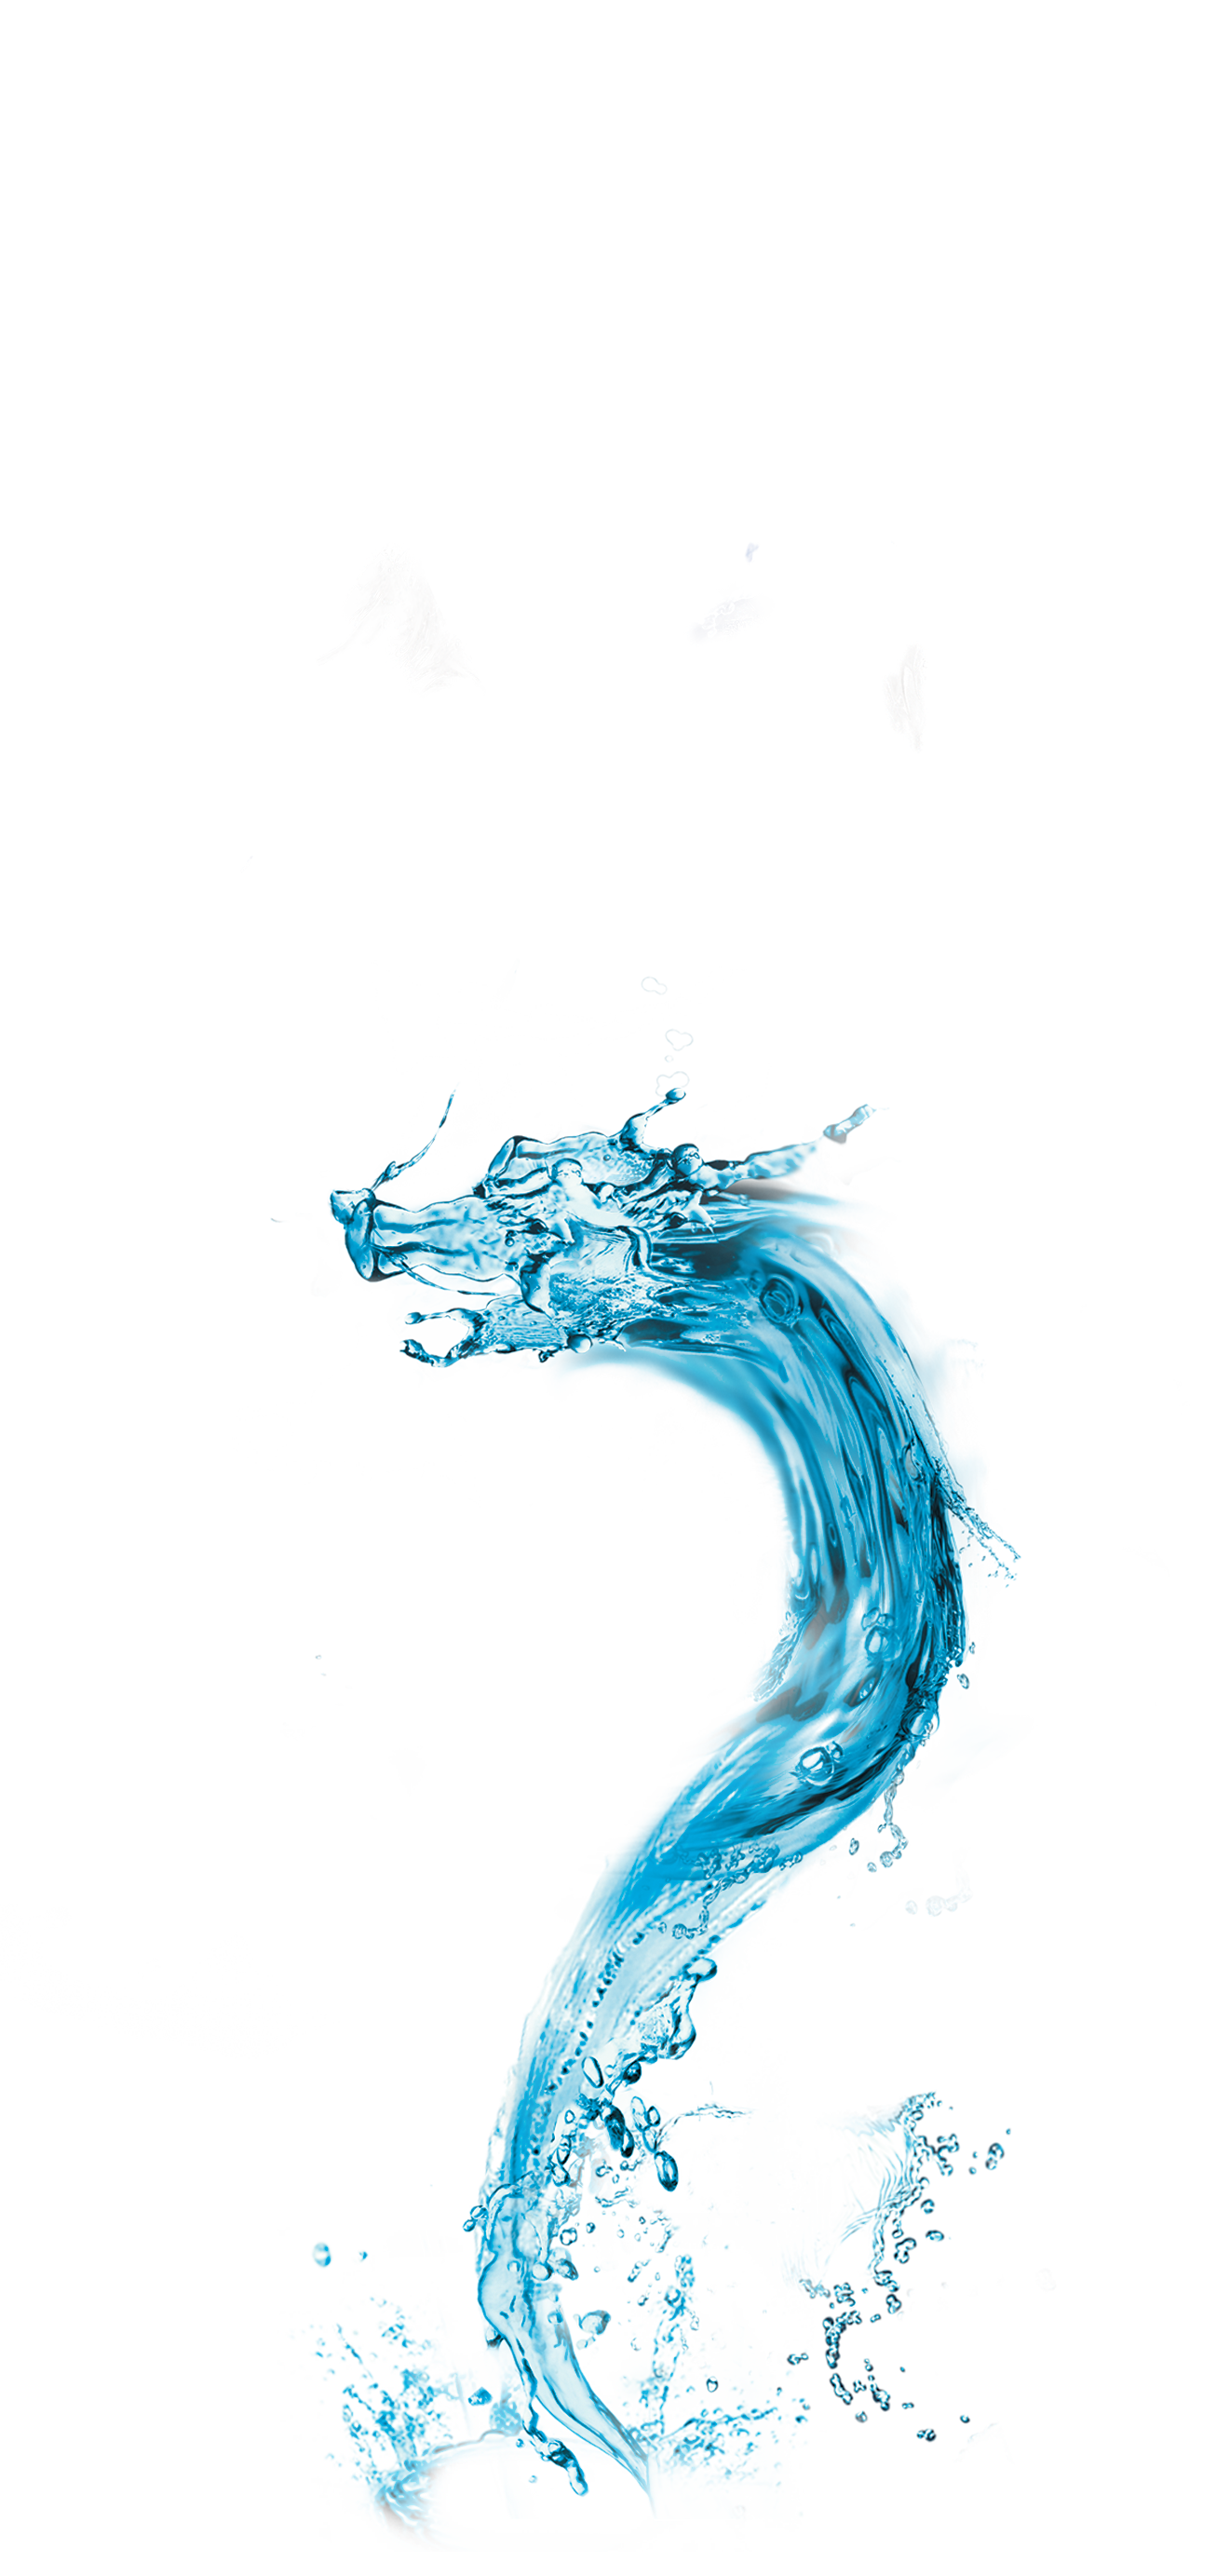 Water Effects Long PNG Image High Quality PNG Image